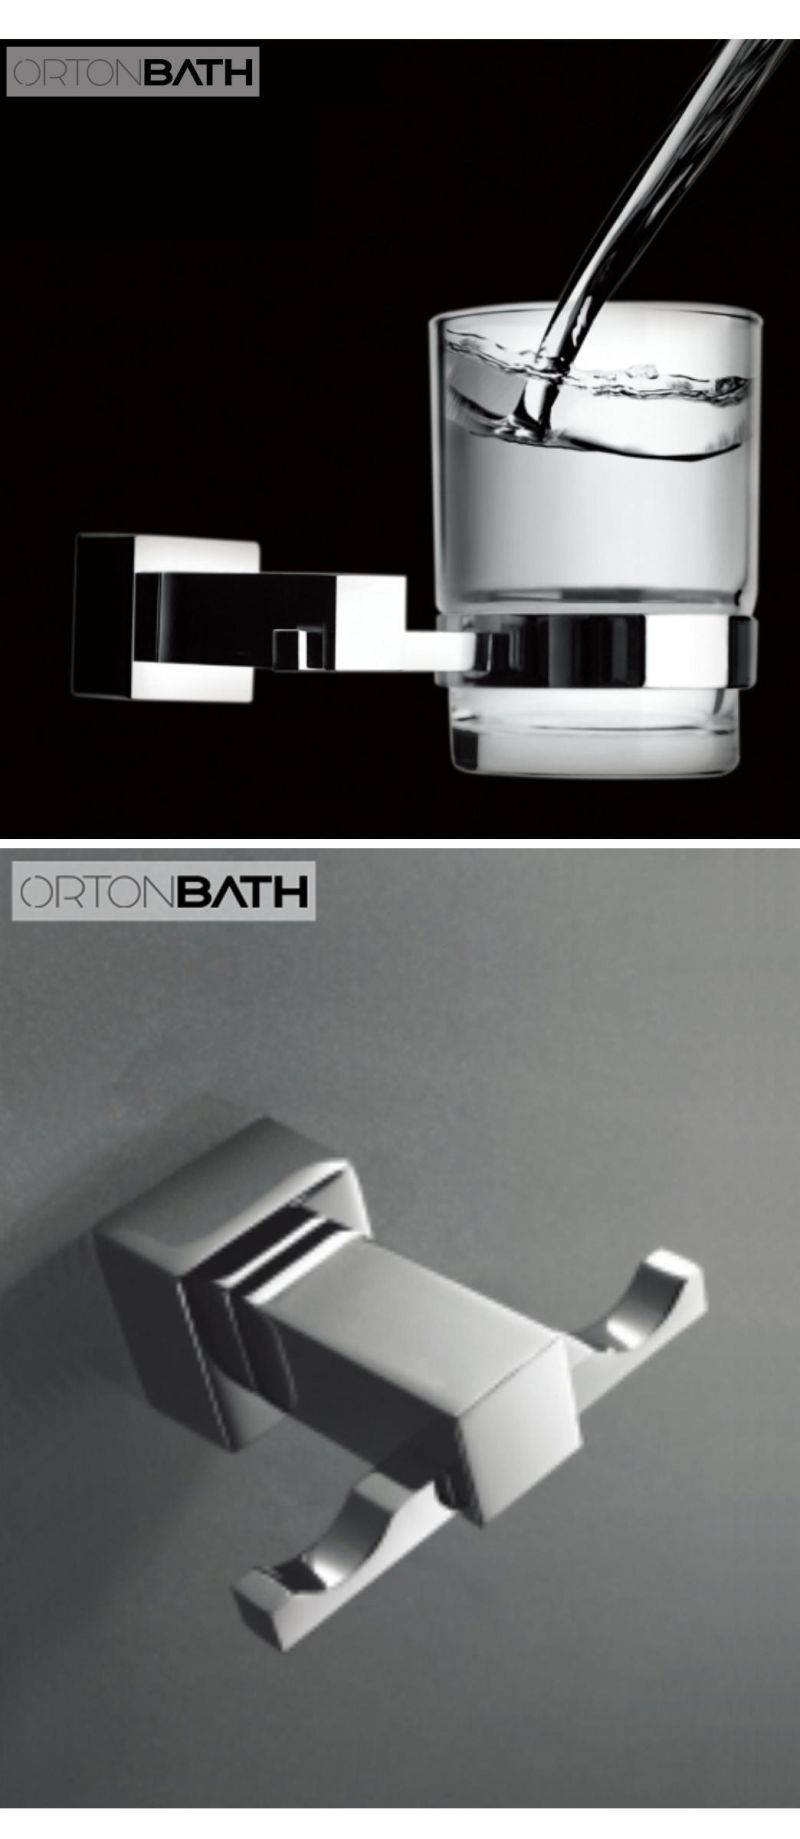 Square Base Luxurious Stainless Steel Commercial Bathroom Accessories Set for Hotel Public Restroom